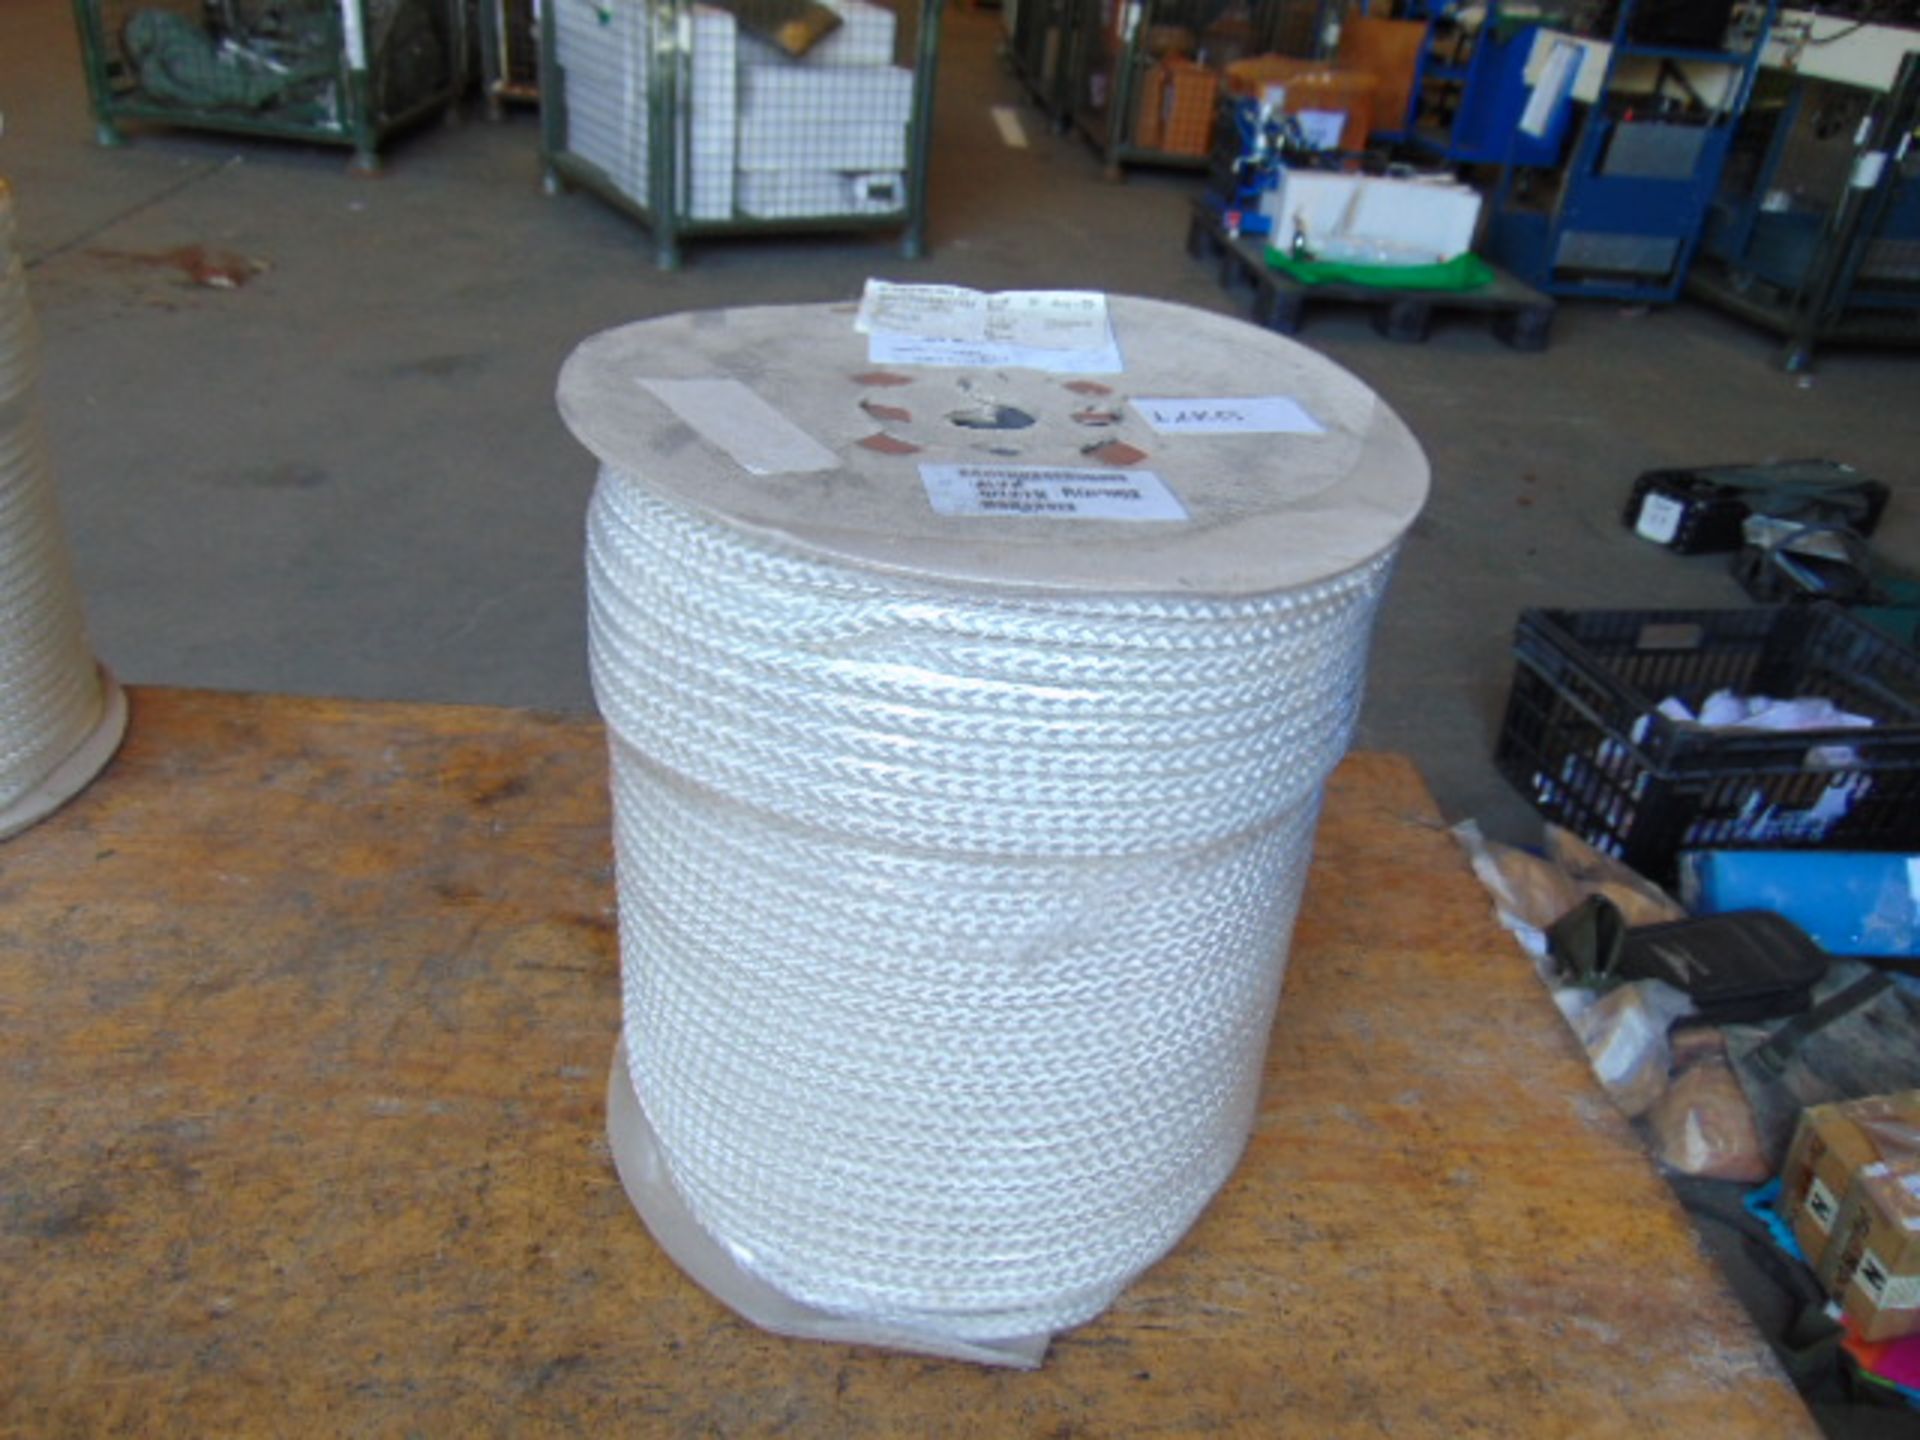 New Unissued 1 x 12kg (220m) Marine Quality Rope on Drum - Image 6 of 7